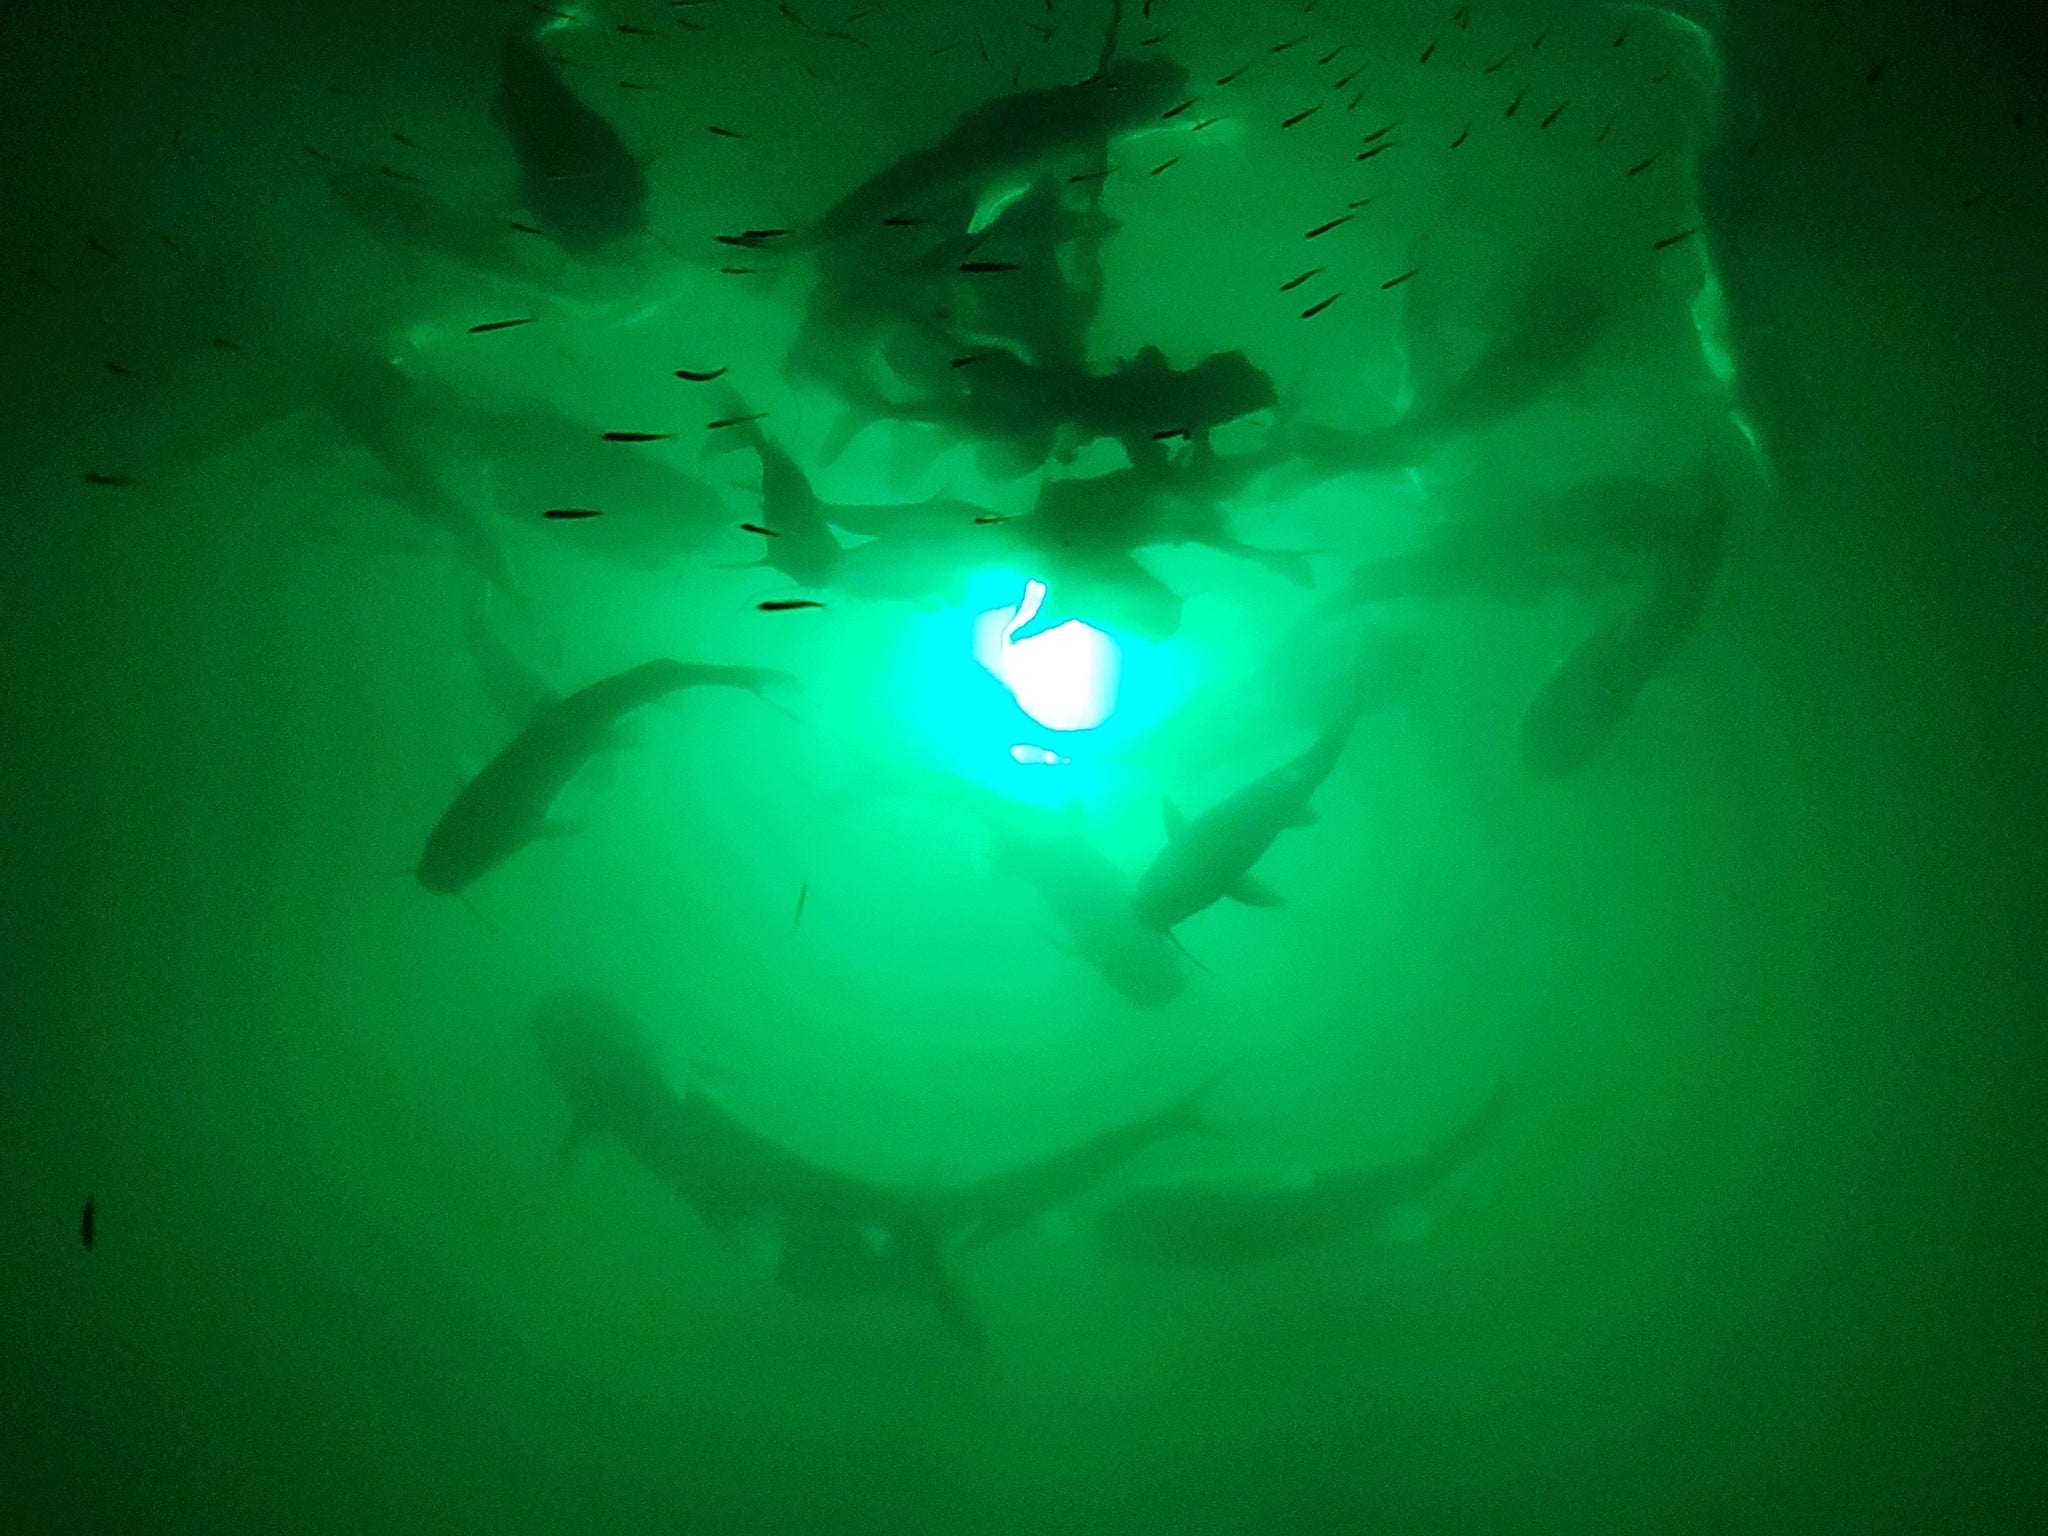 Go Pro Underwater footage of the Green Blob Underwater Fishing Light in  Action! 